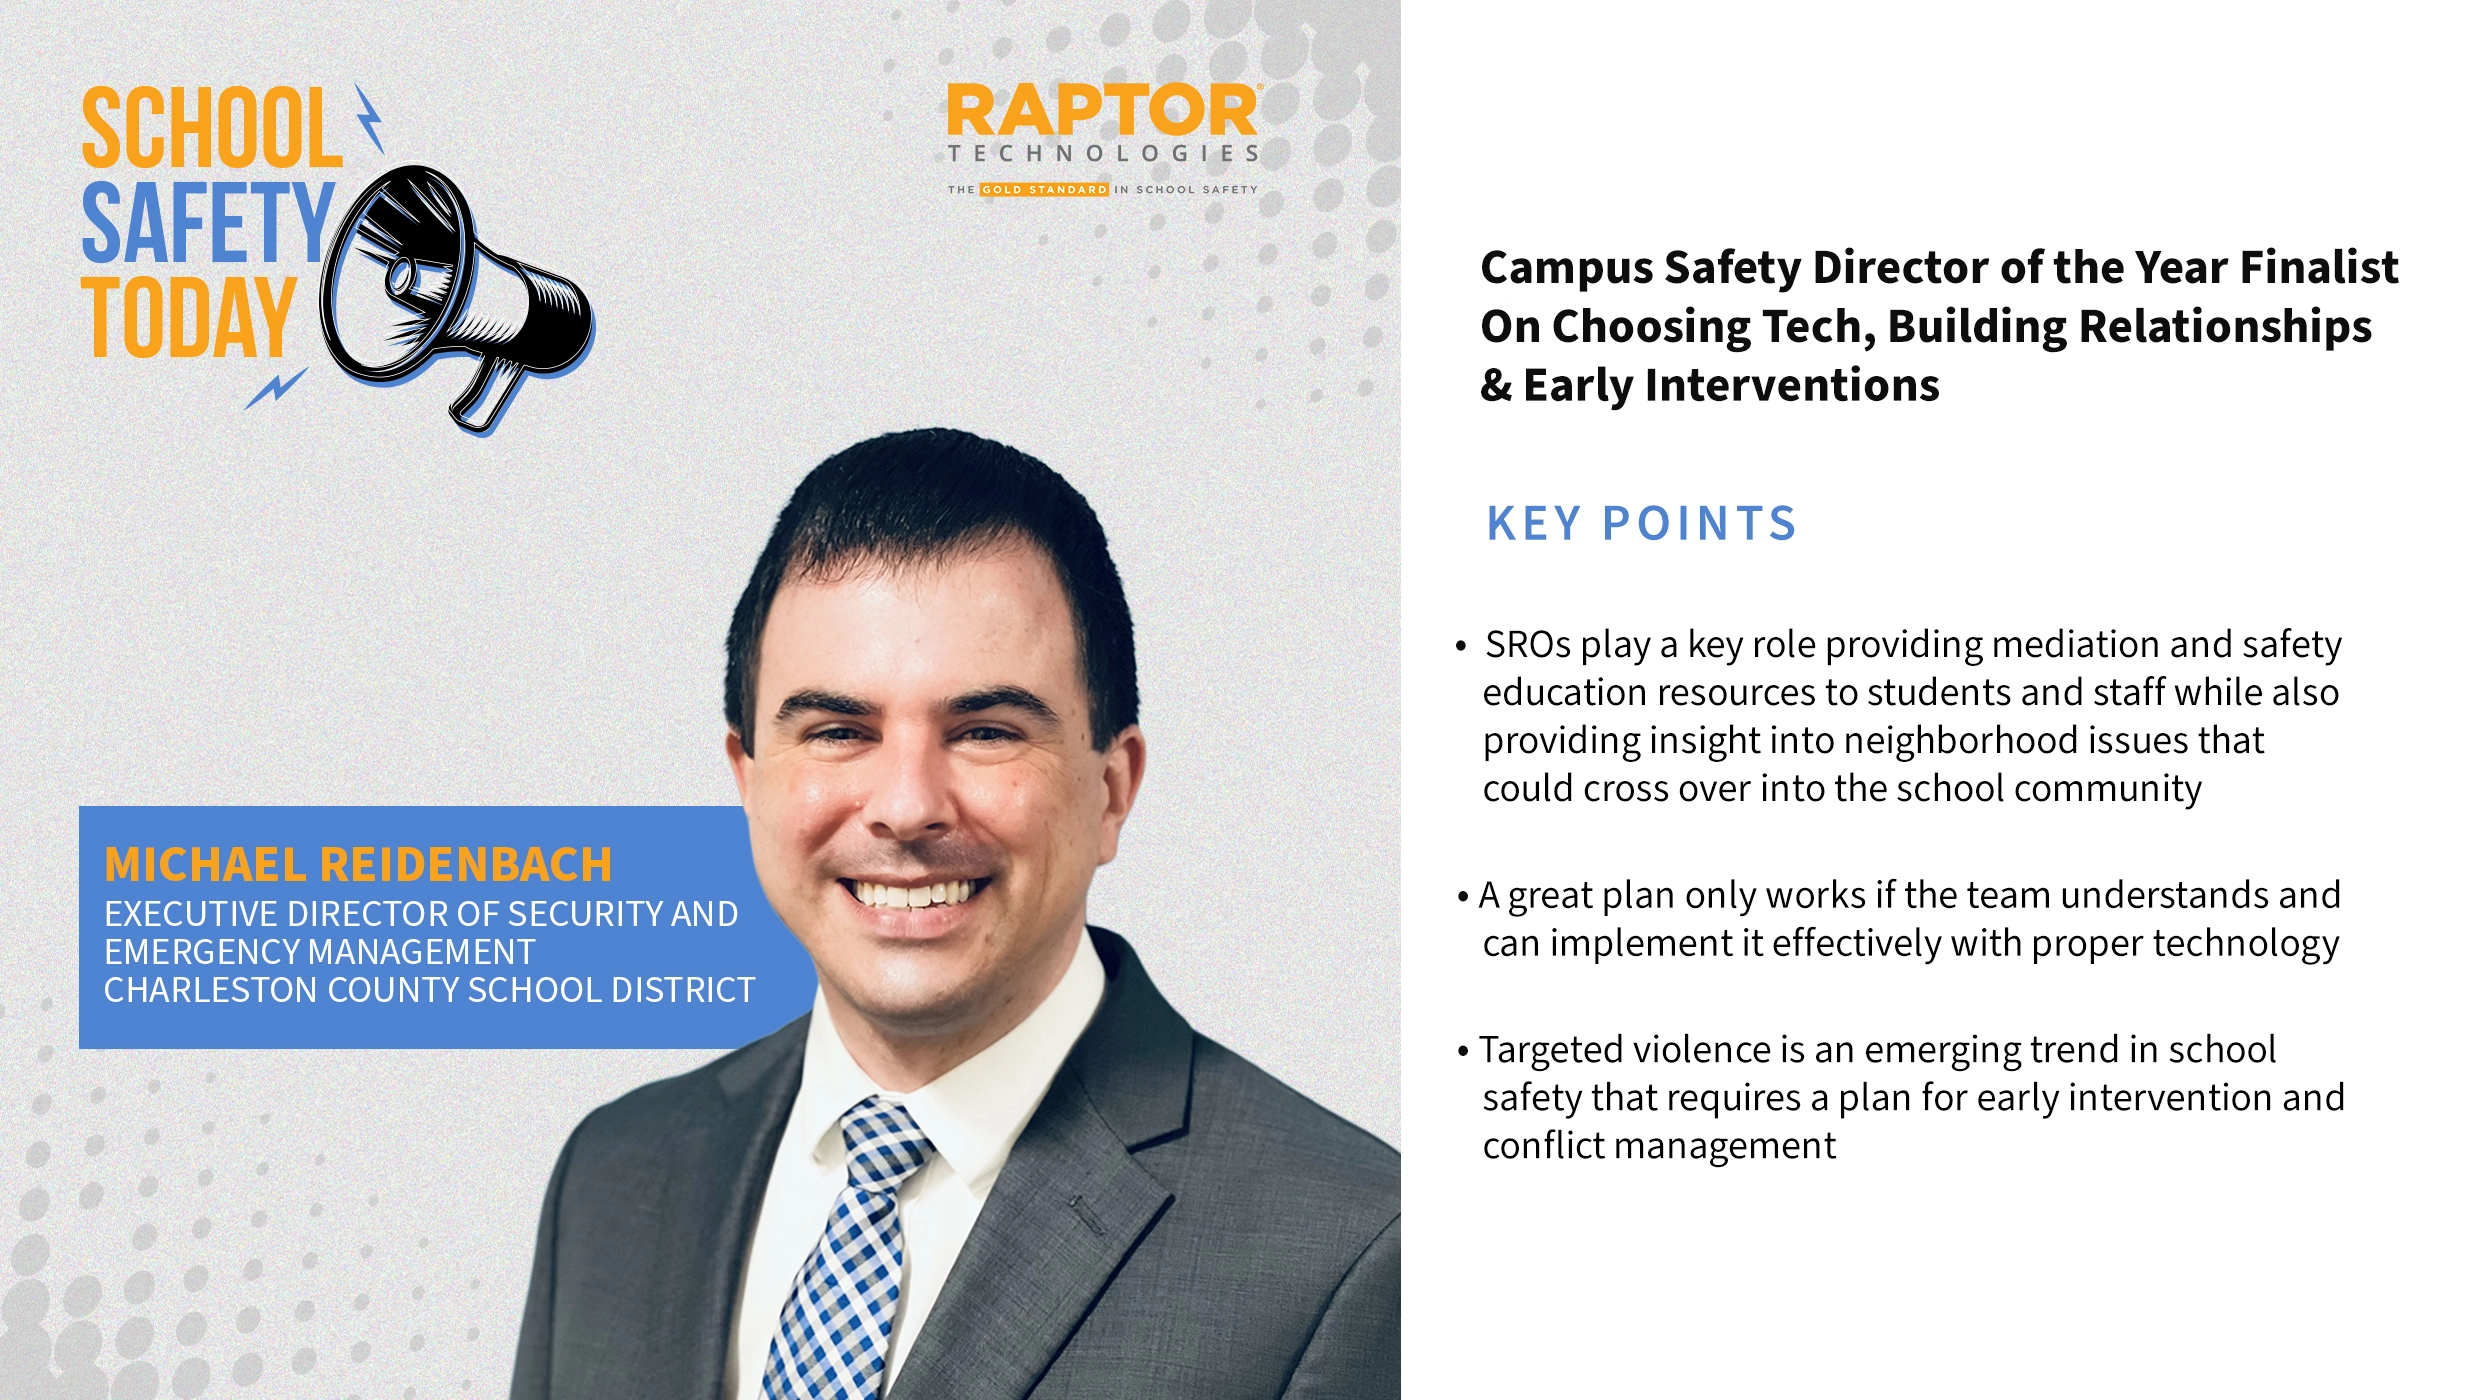 Lessons from Campus Safety Director of the Year Finalist Michael Reidenbach